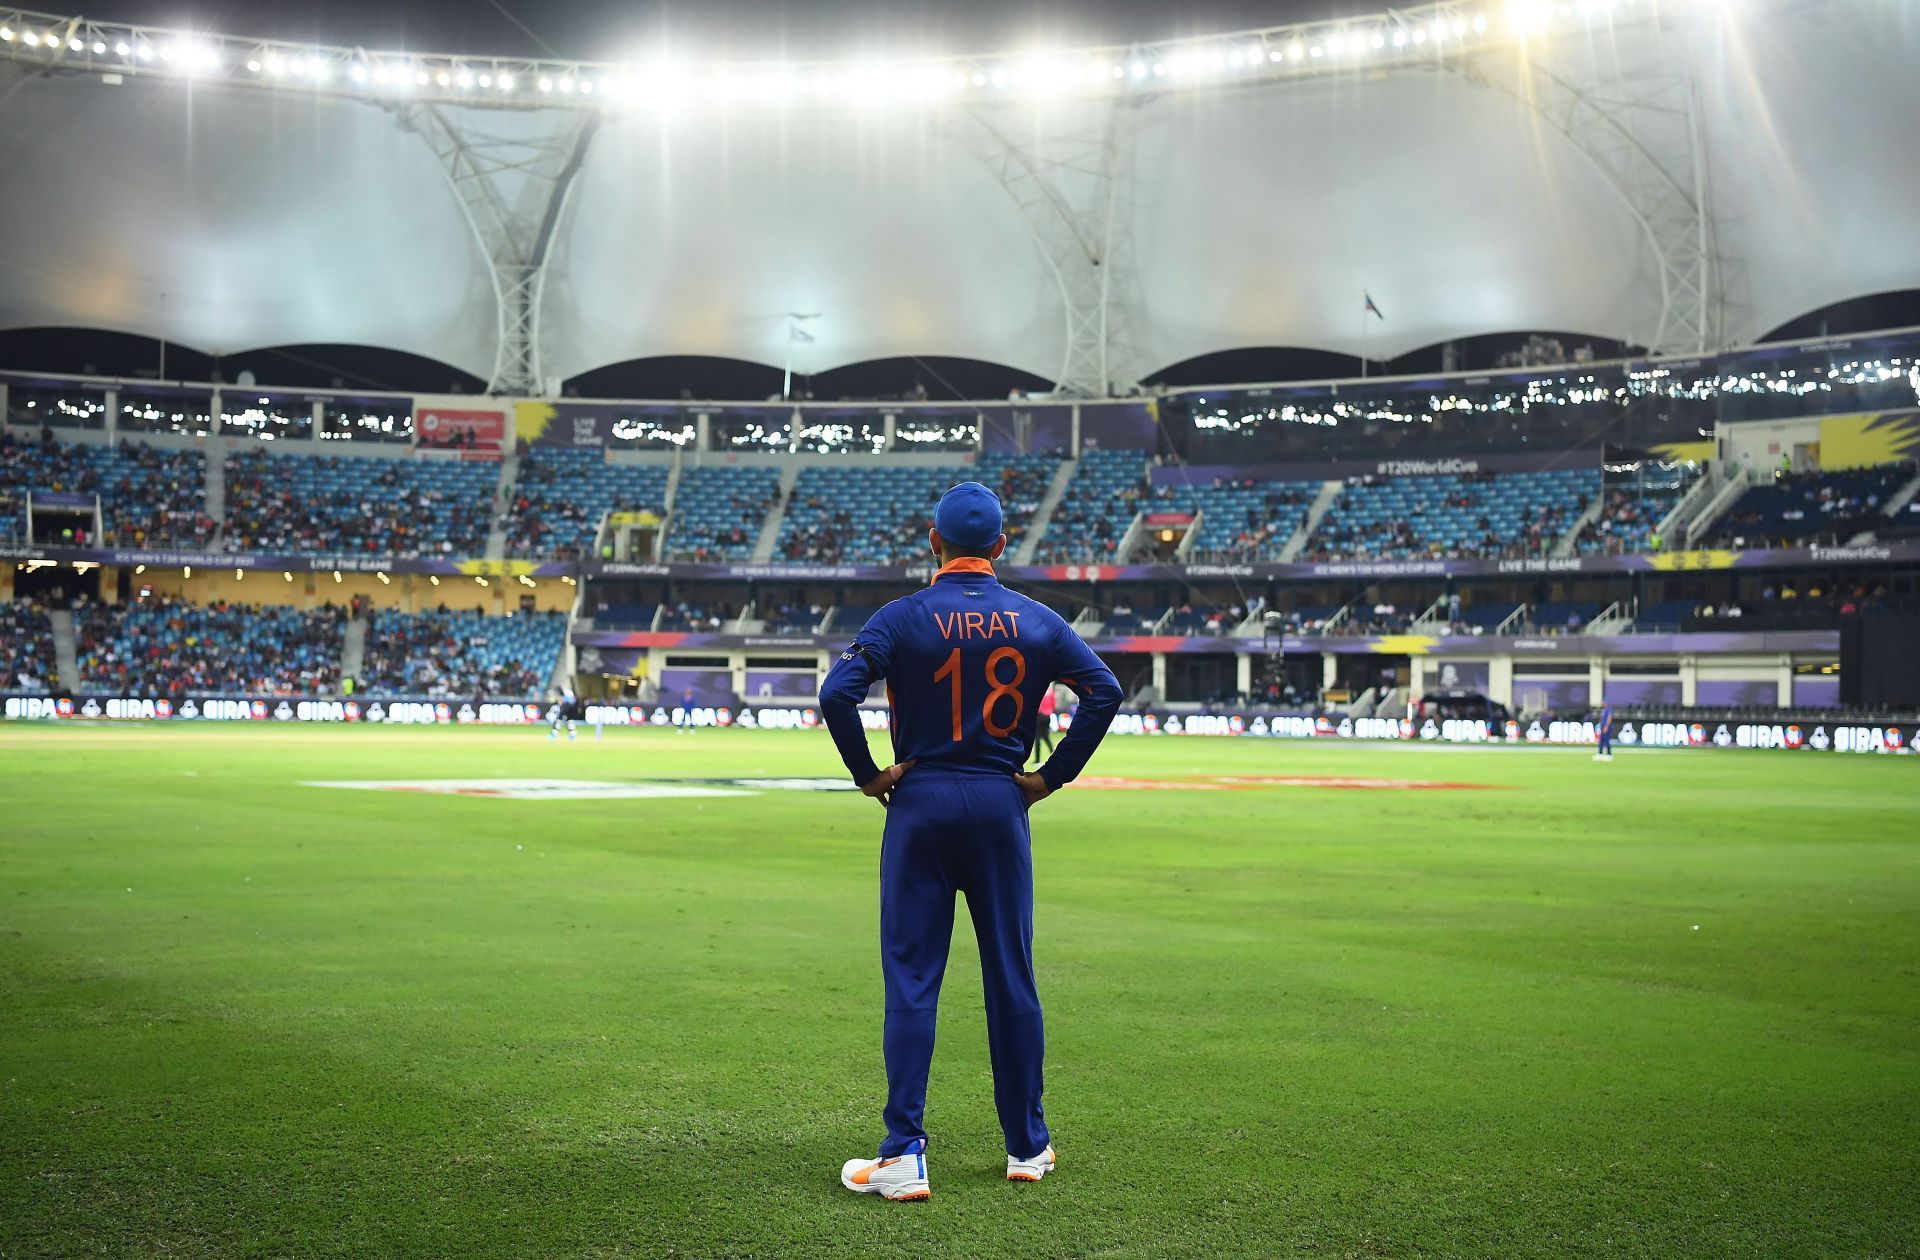 The man and the setting - final game as India T20I captain for Virat Kohli